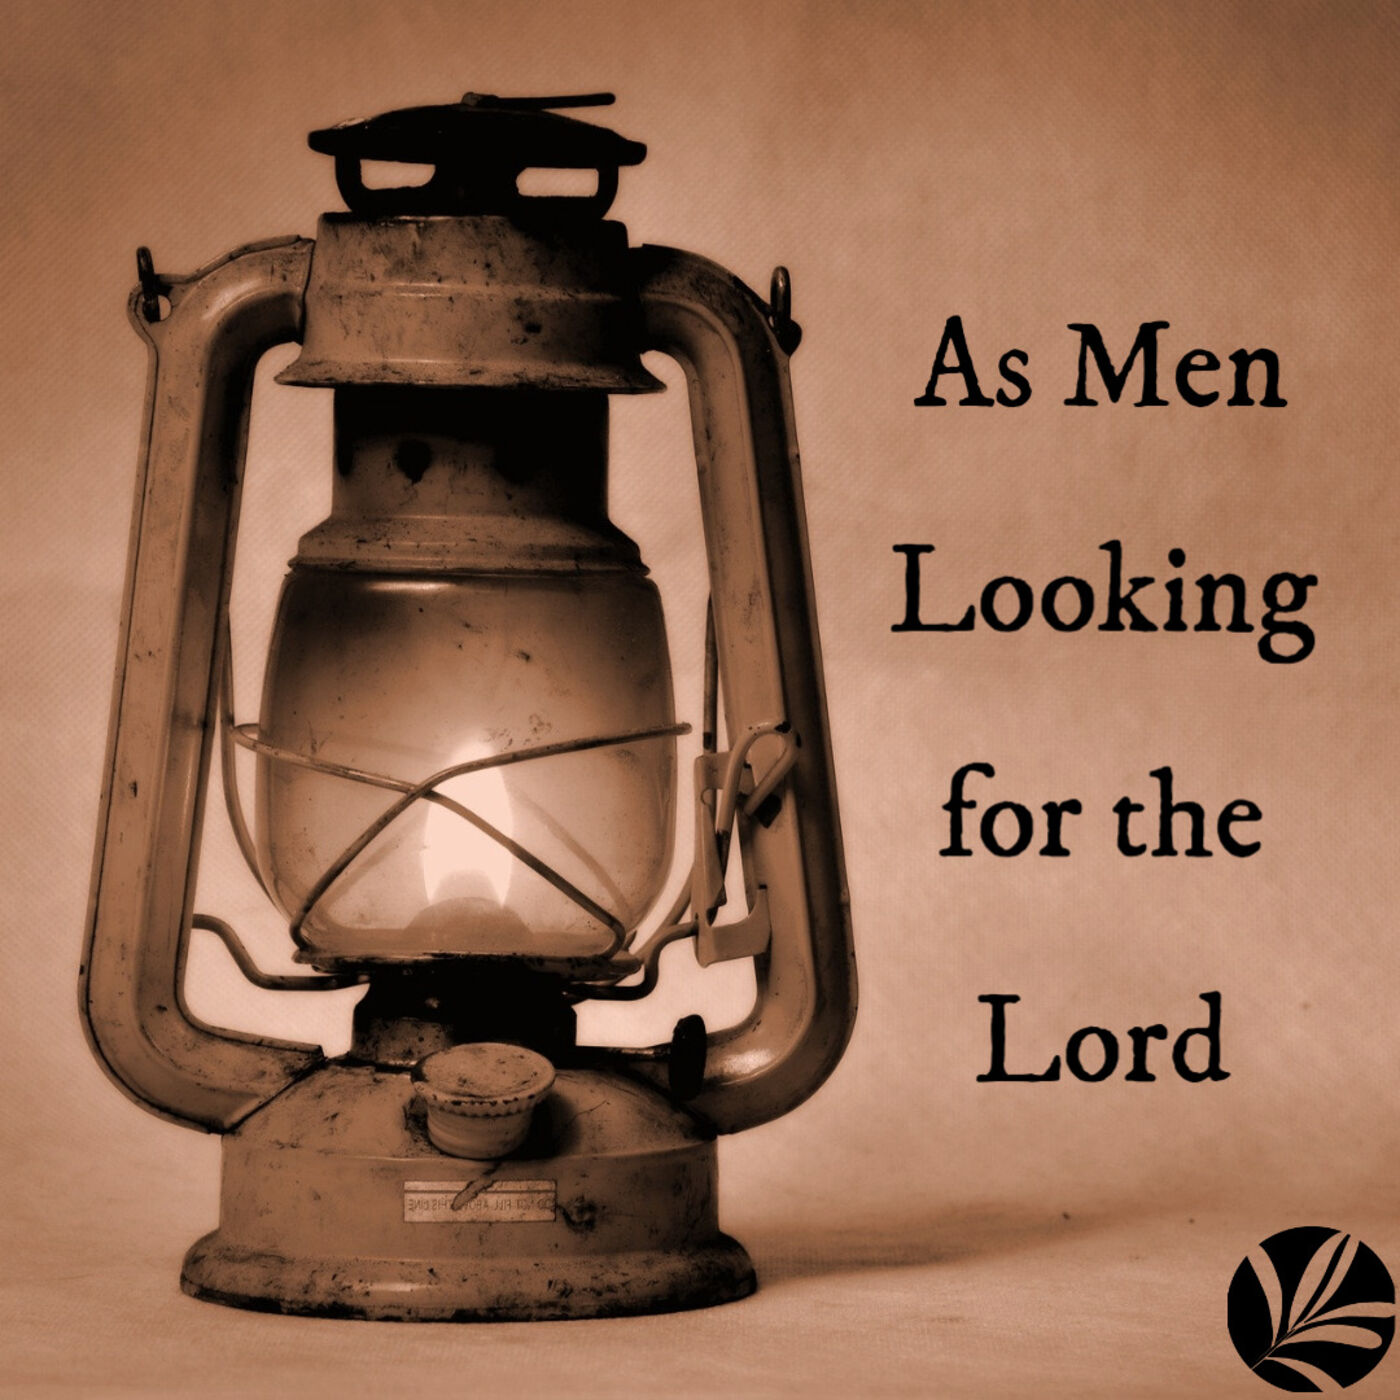 As Men Looking For the Lord